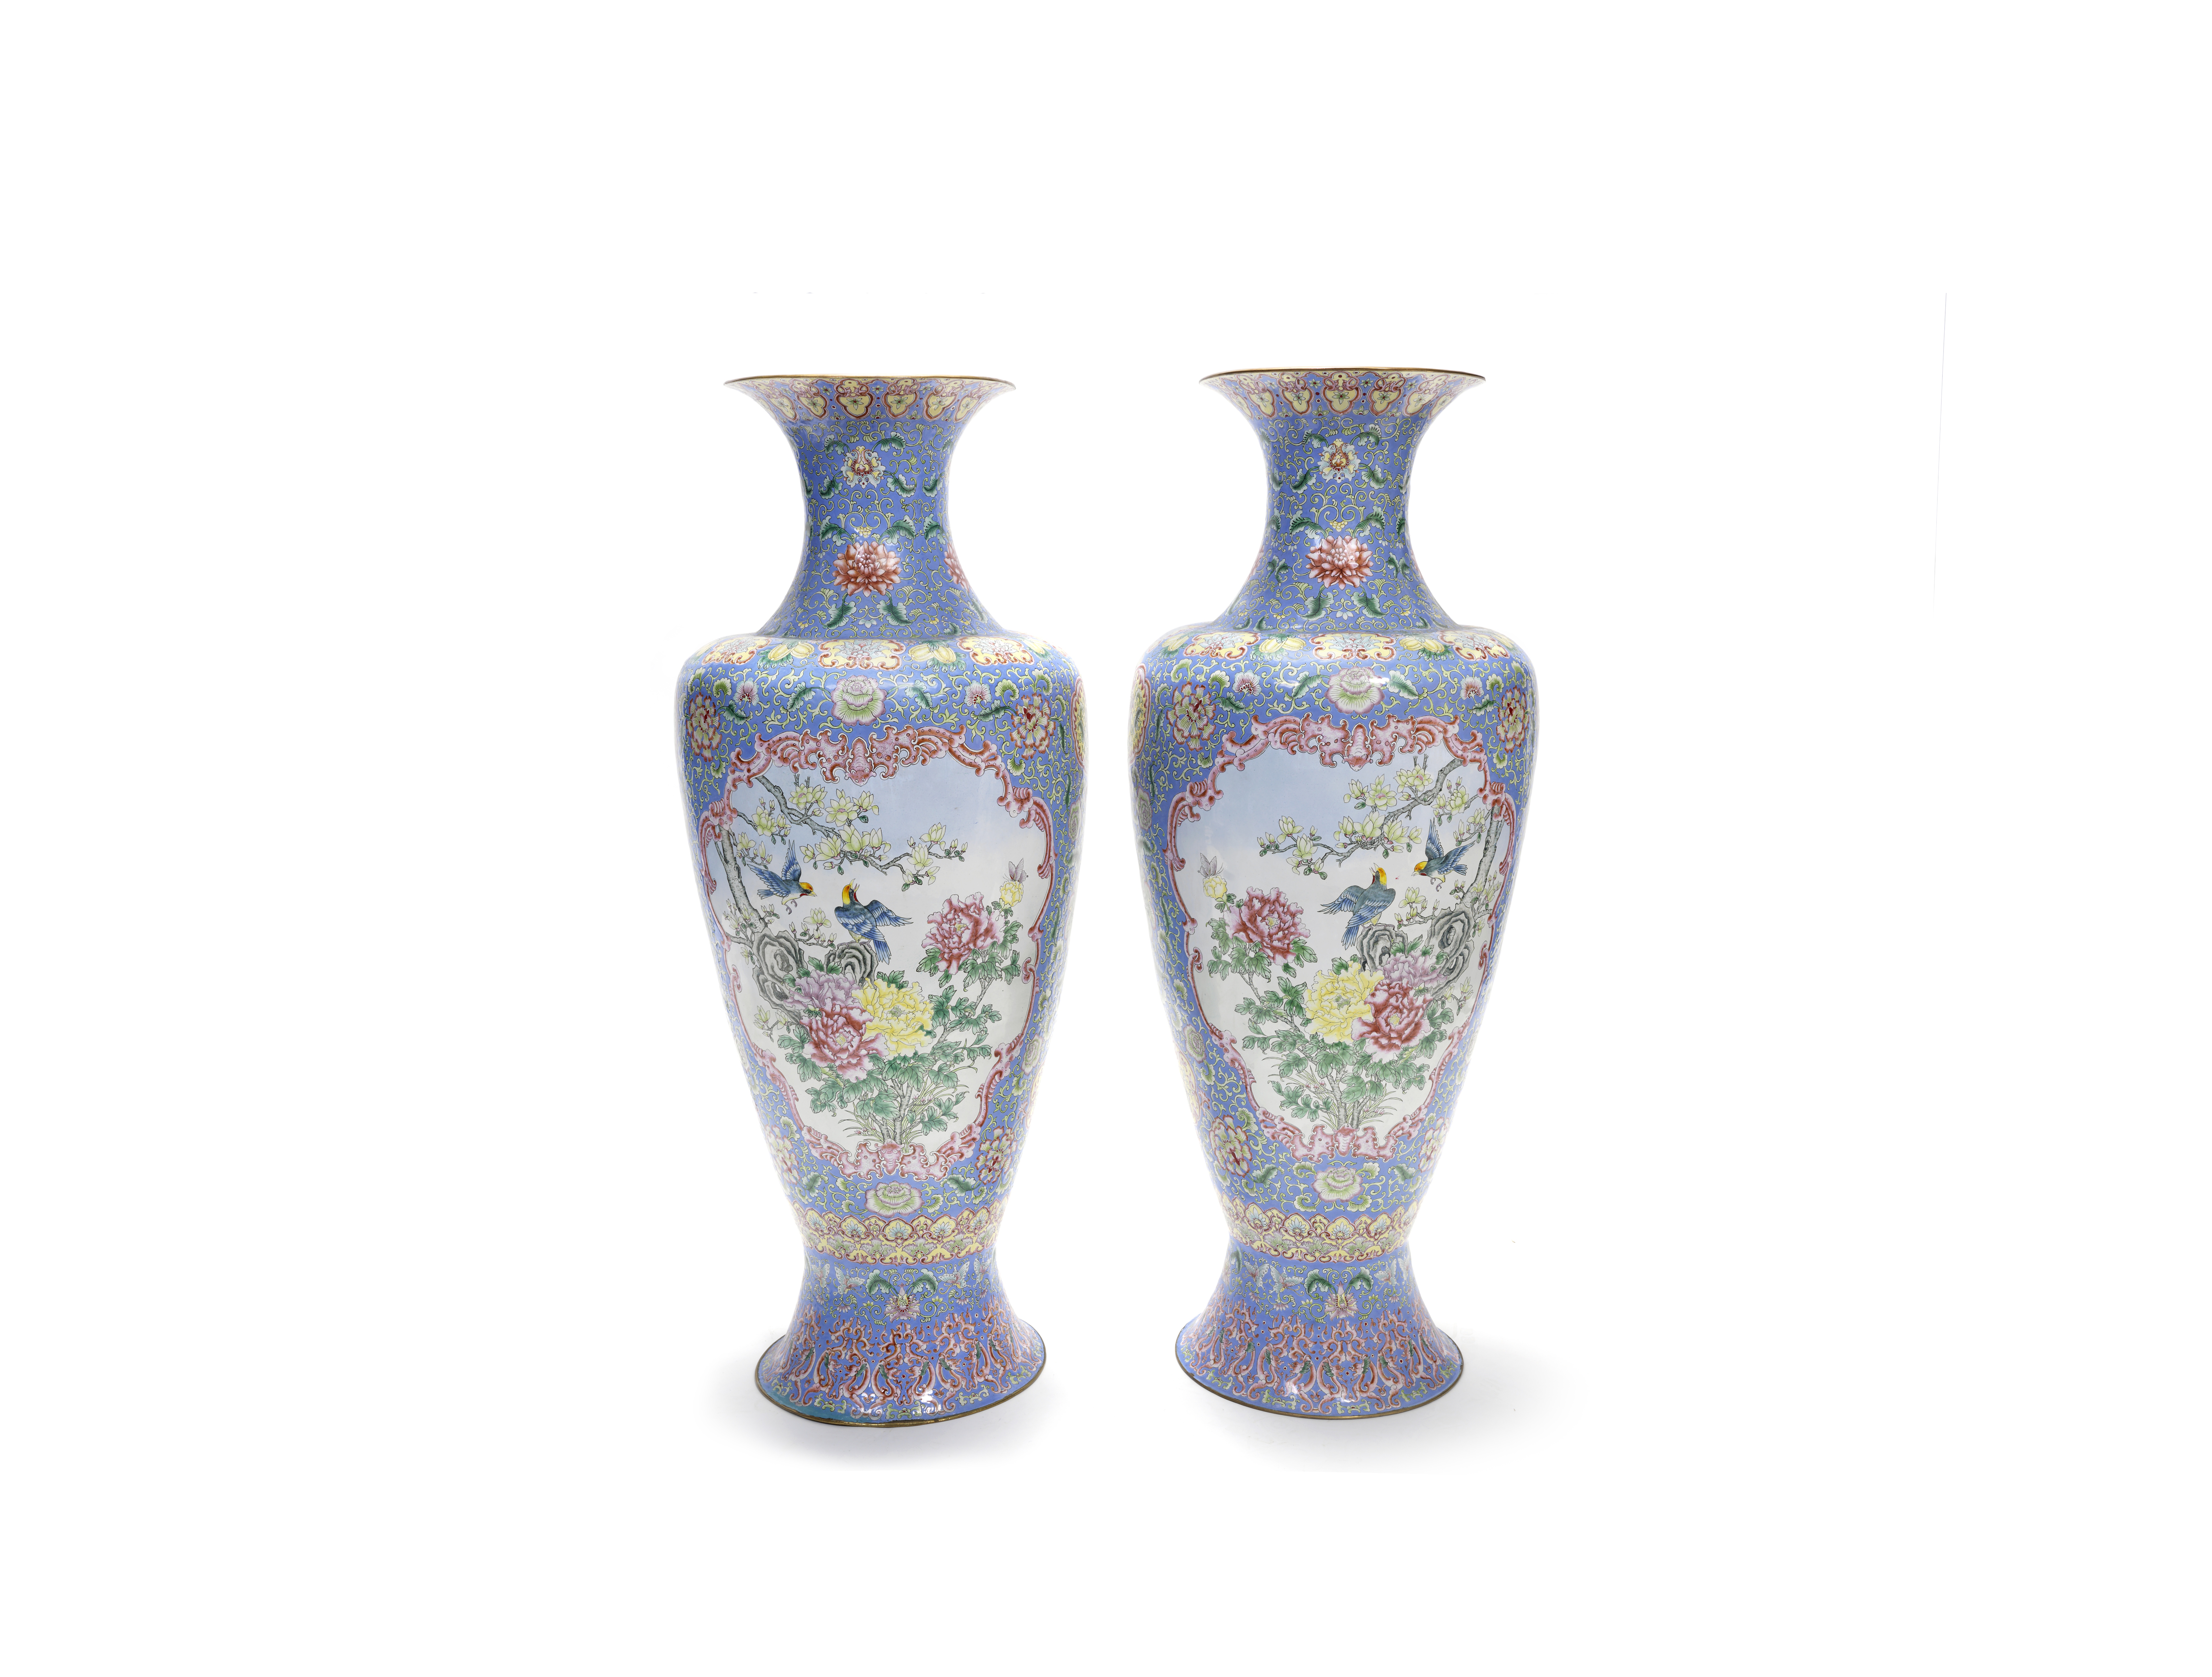 A VERY LARGE PAIR OF PAINTED ENAMEL VASES 20th century (2)